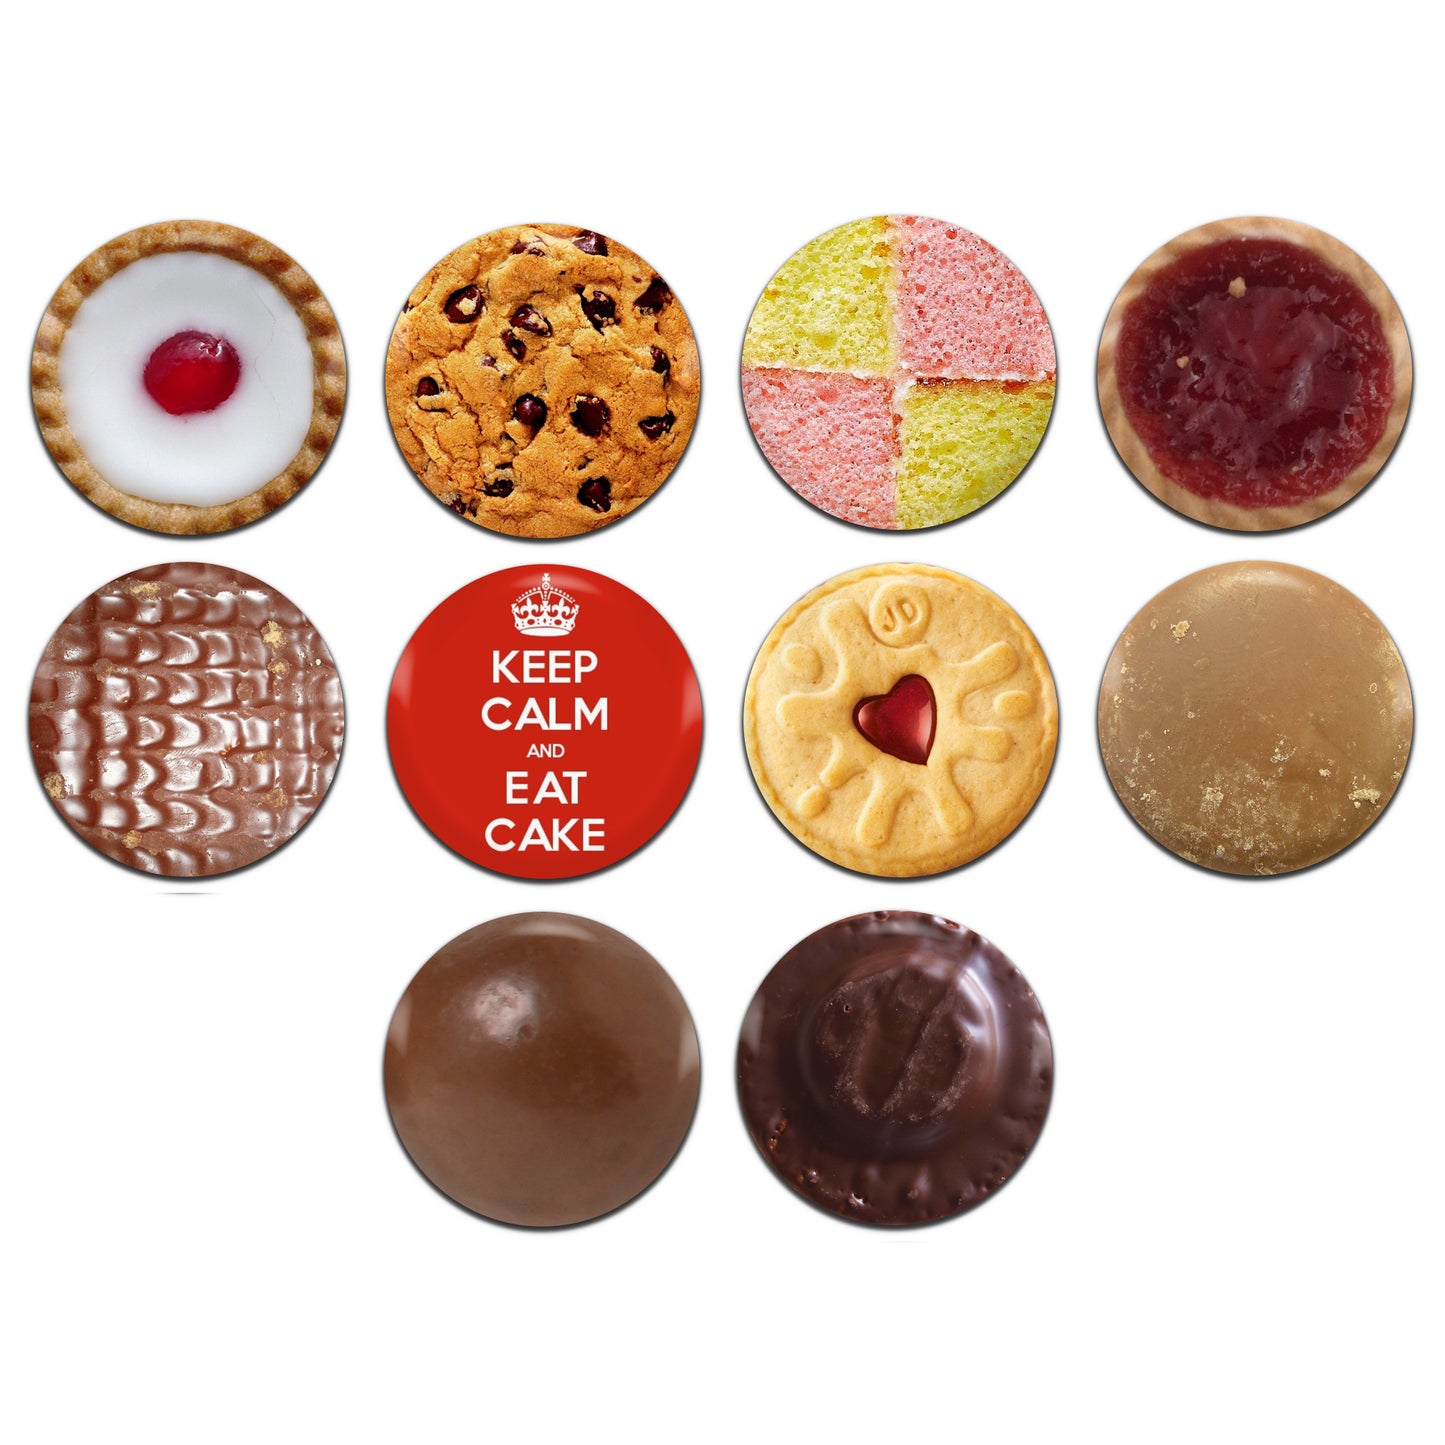 Cakes Biscuits Sweets Novelty 25mm / 1 Inch D-Pin Button Badges (10x Set)